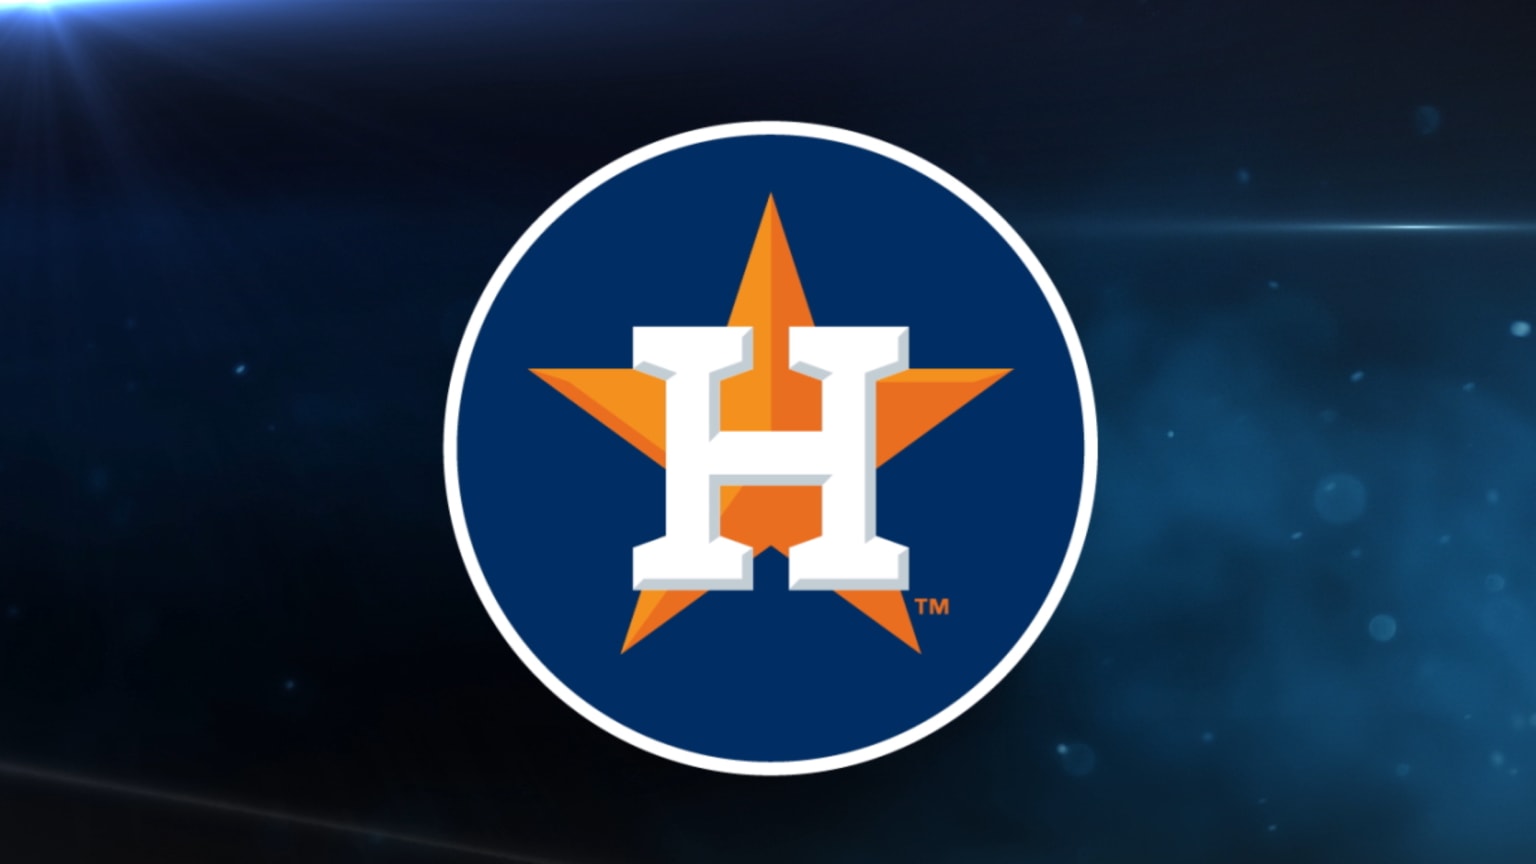 Houston Astros on X: The Houston Astros announced the 2023 Spring Training  schedule today. We will play 29 official Spring Training games in Florida  including a home game vs. a World Baseball